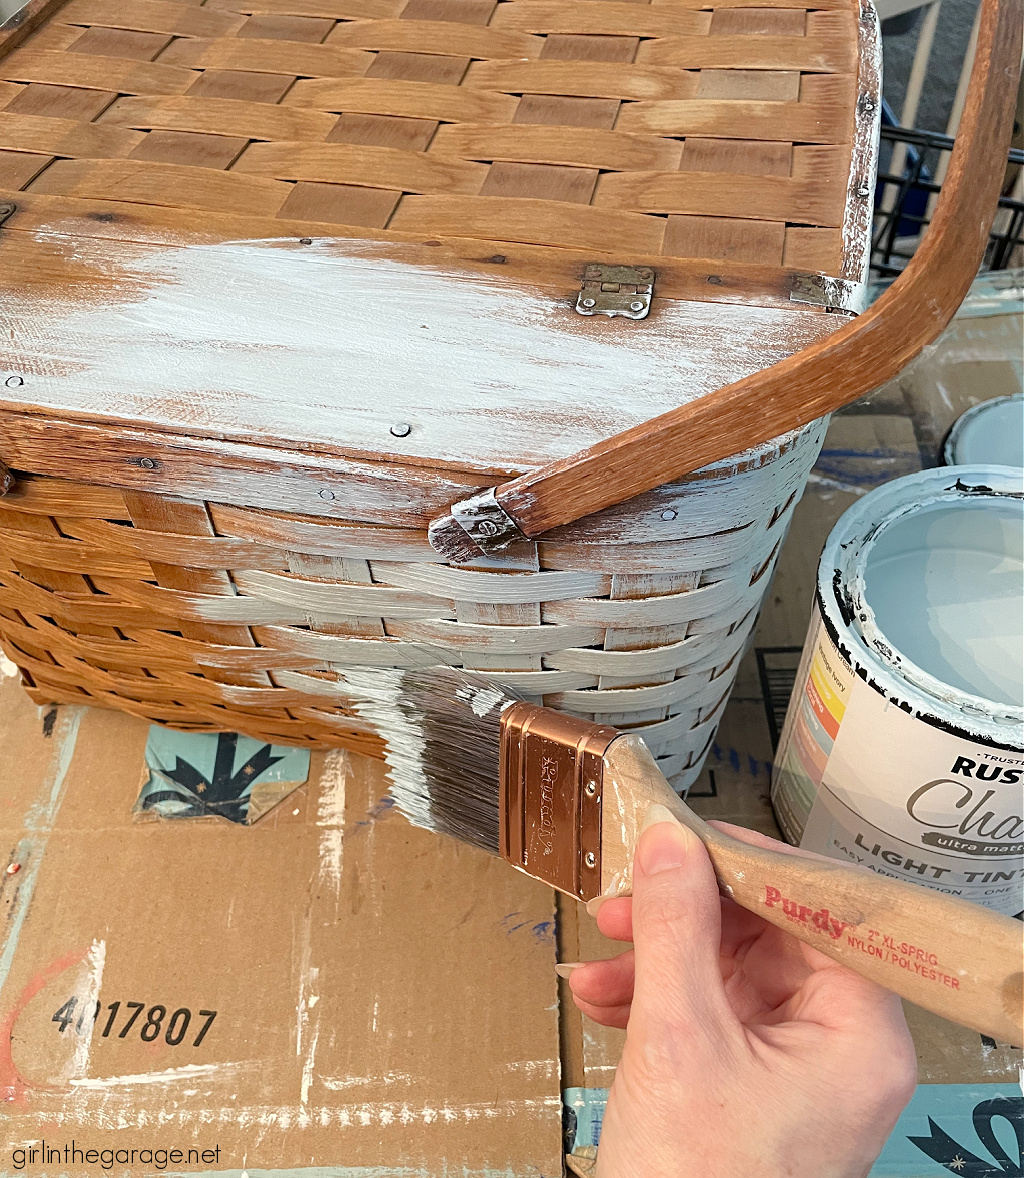 Learn helpful tips for painting a basket and adding a stencil. Turn trash into treasure with this easy but dramatic decor makeover by Girl in the Garage.